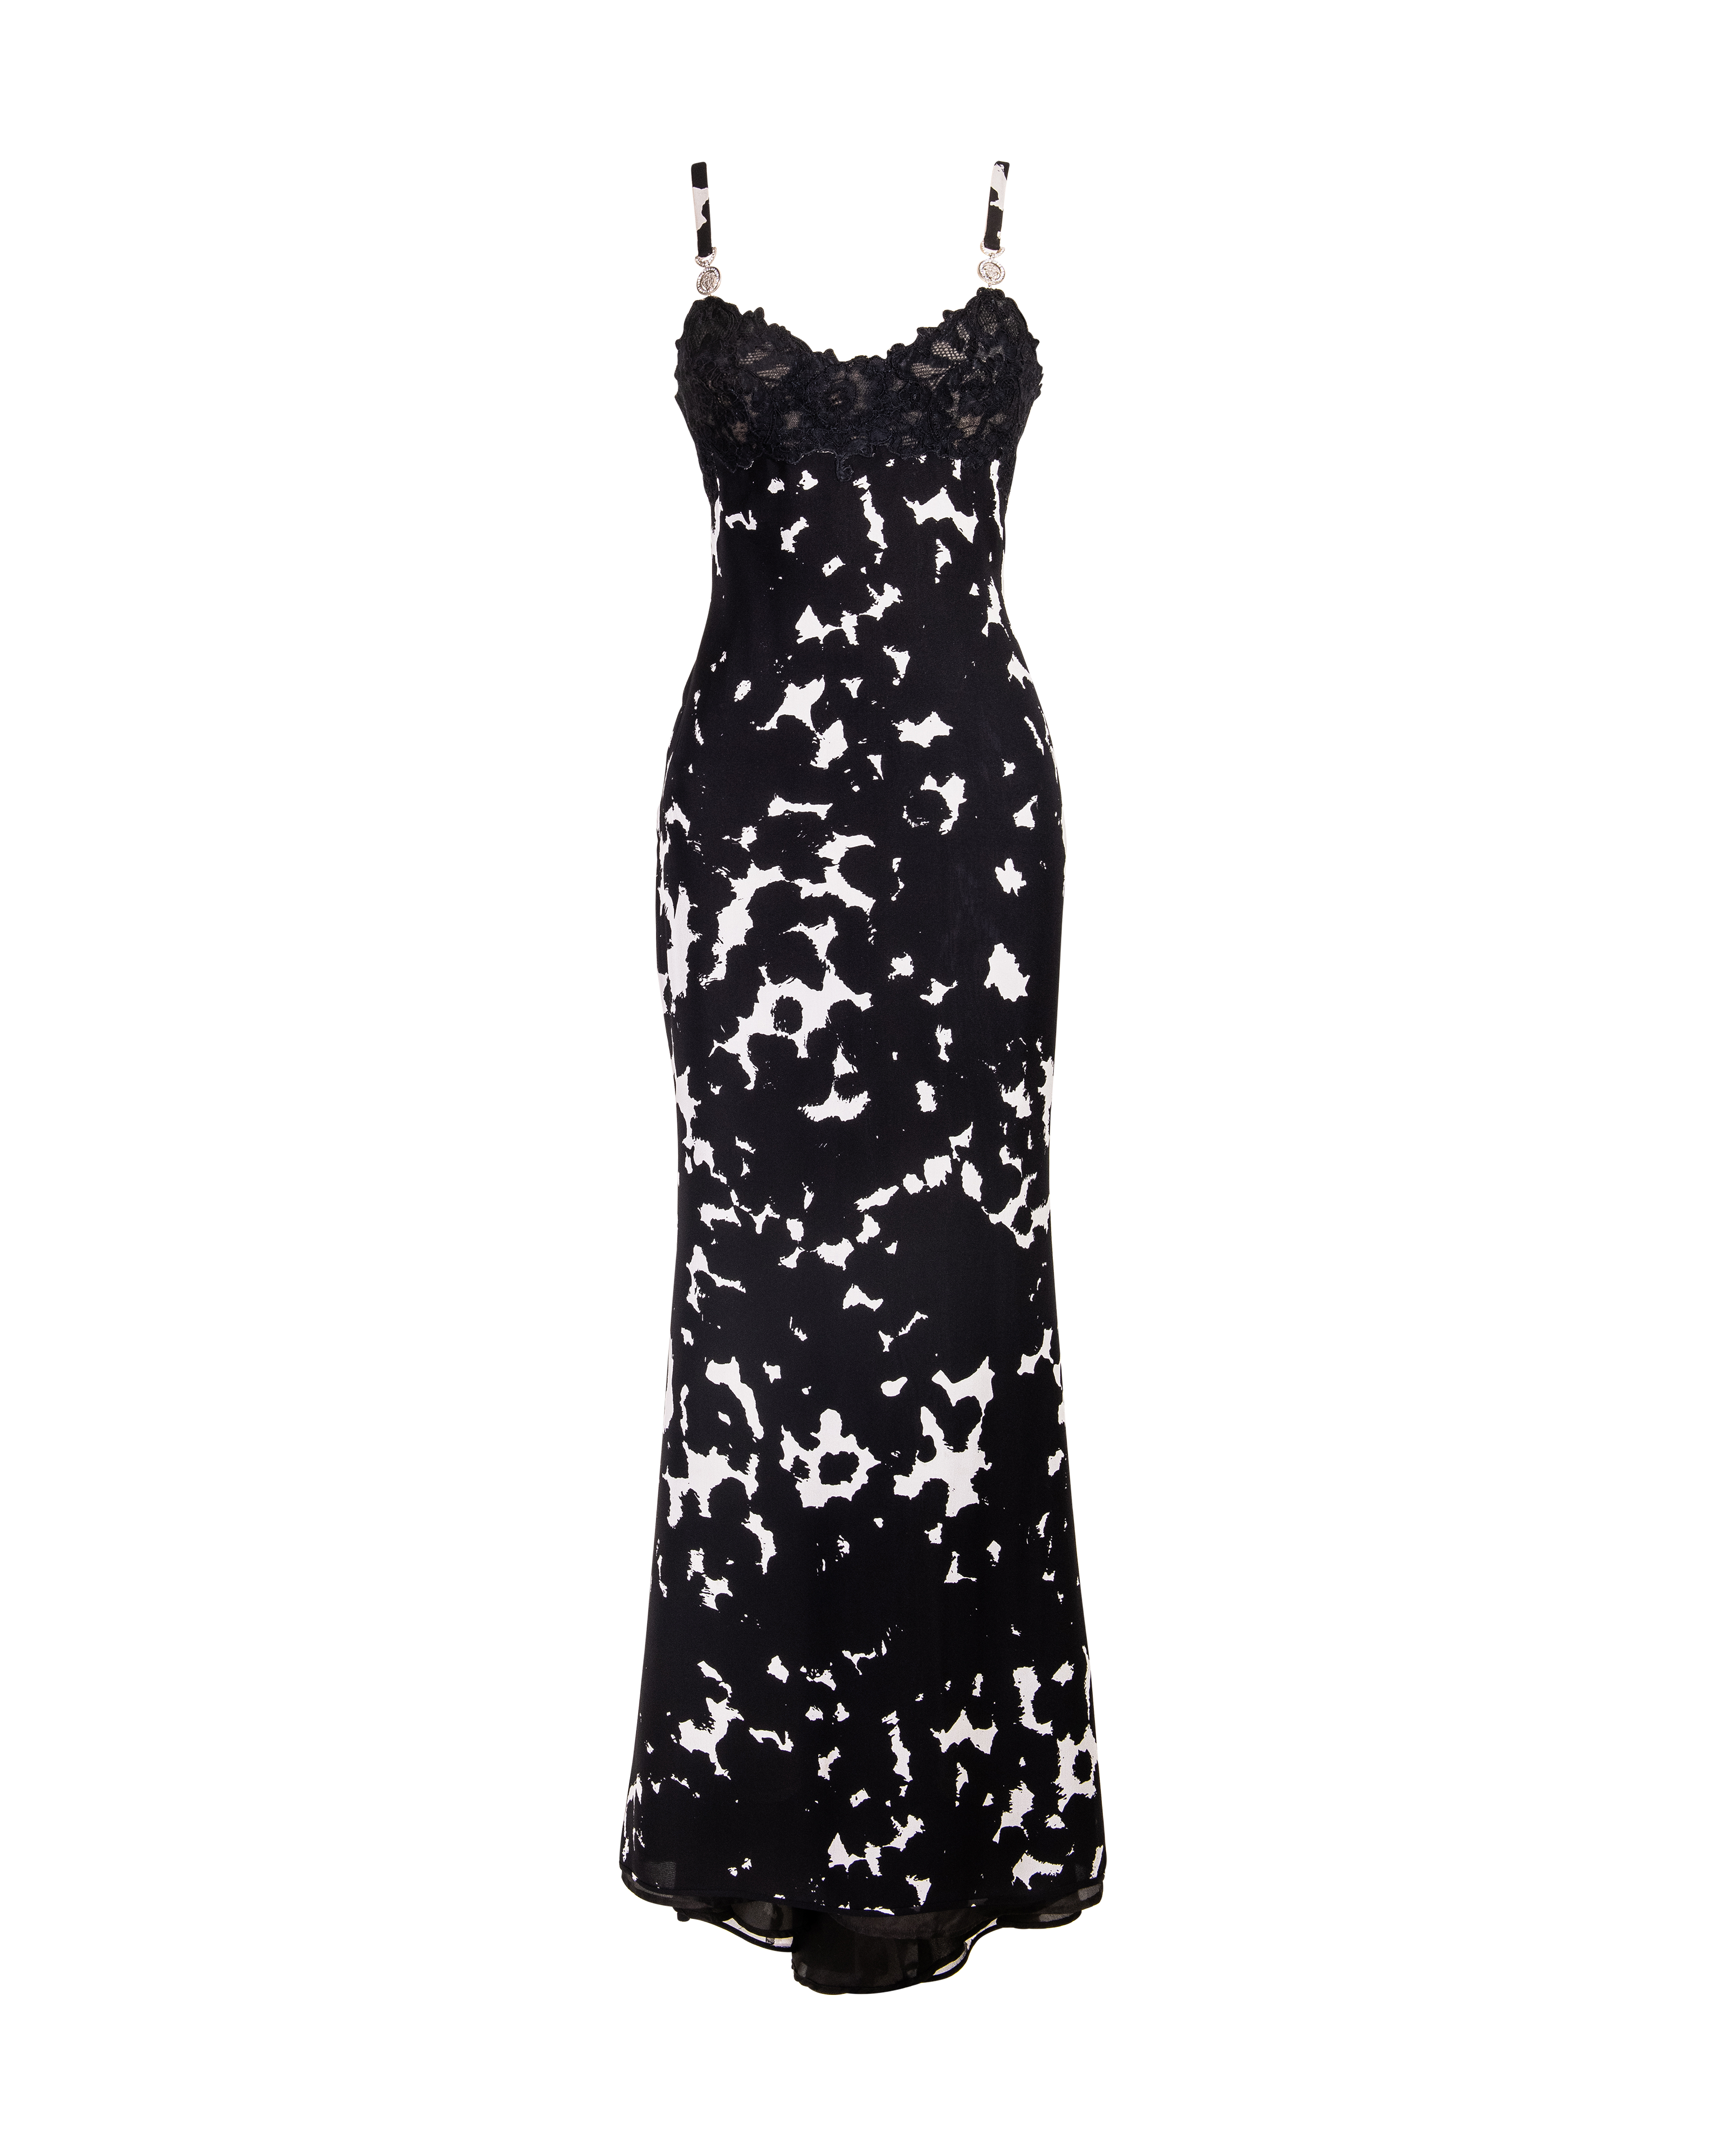 S/S 1996 Haute Couture Cow Print Gown with Lace Bust